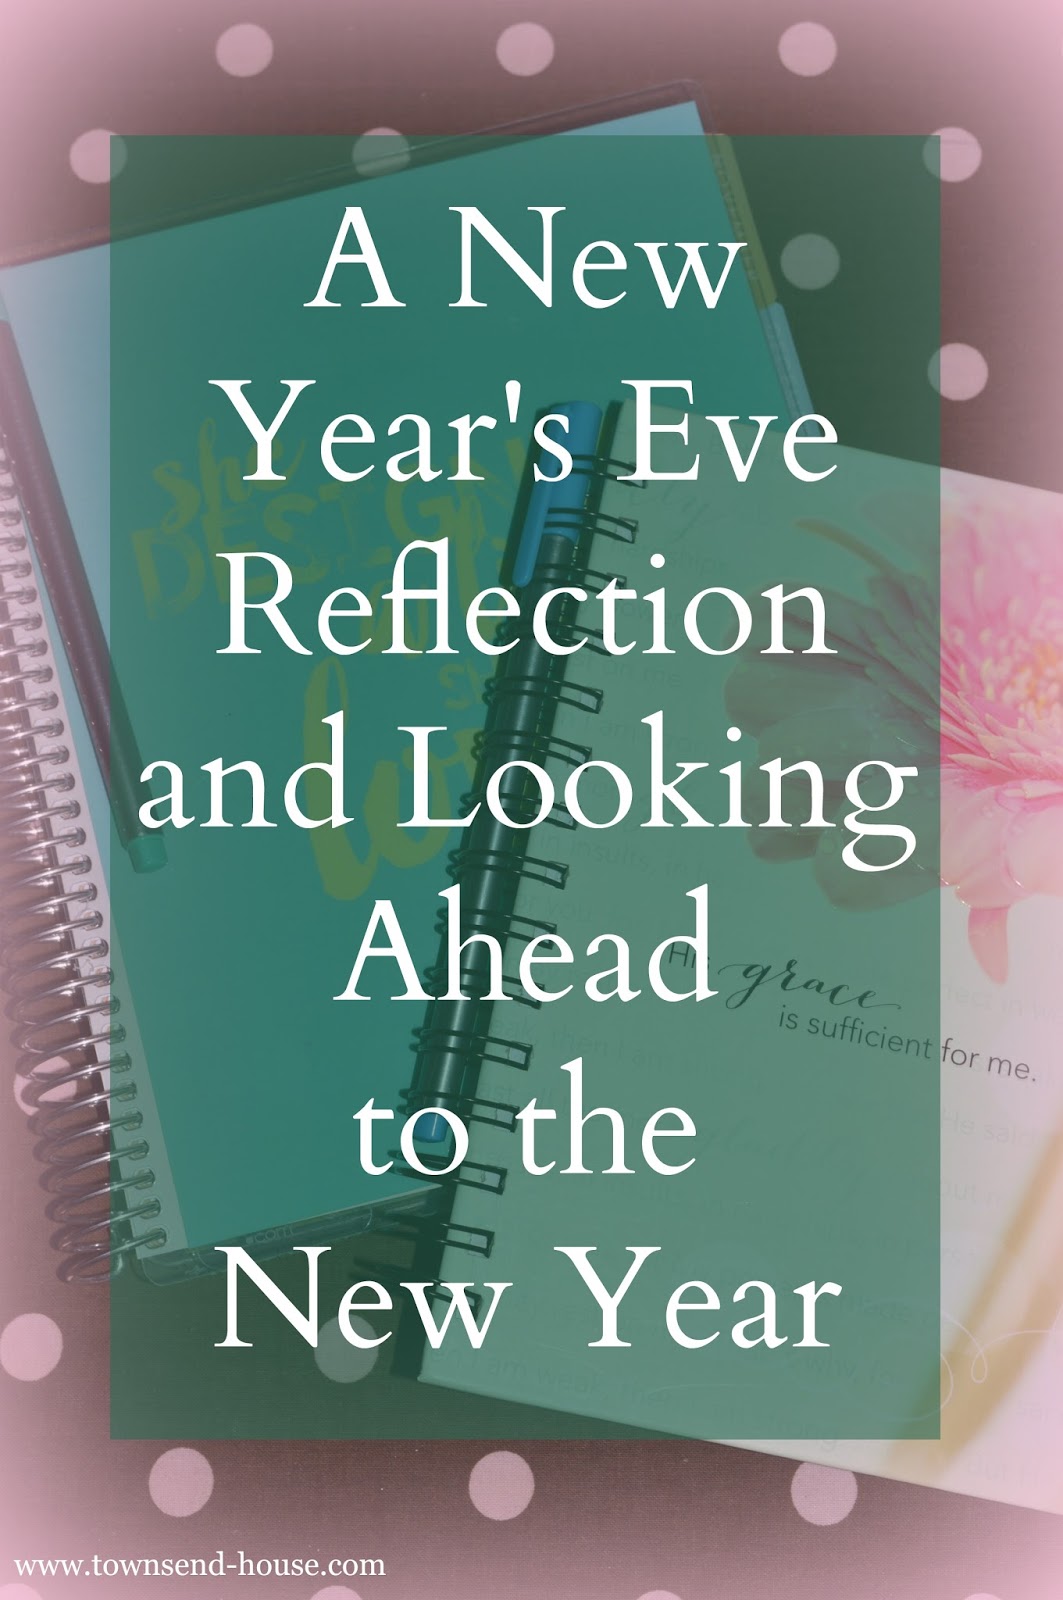 A New Year's Eve Reflection and Looking Ahead to the New Year